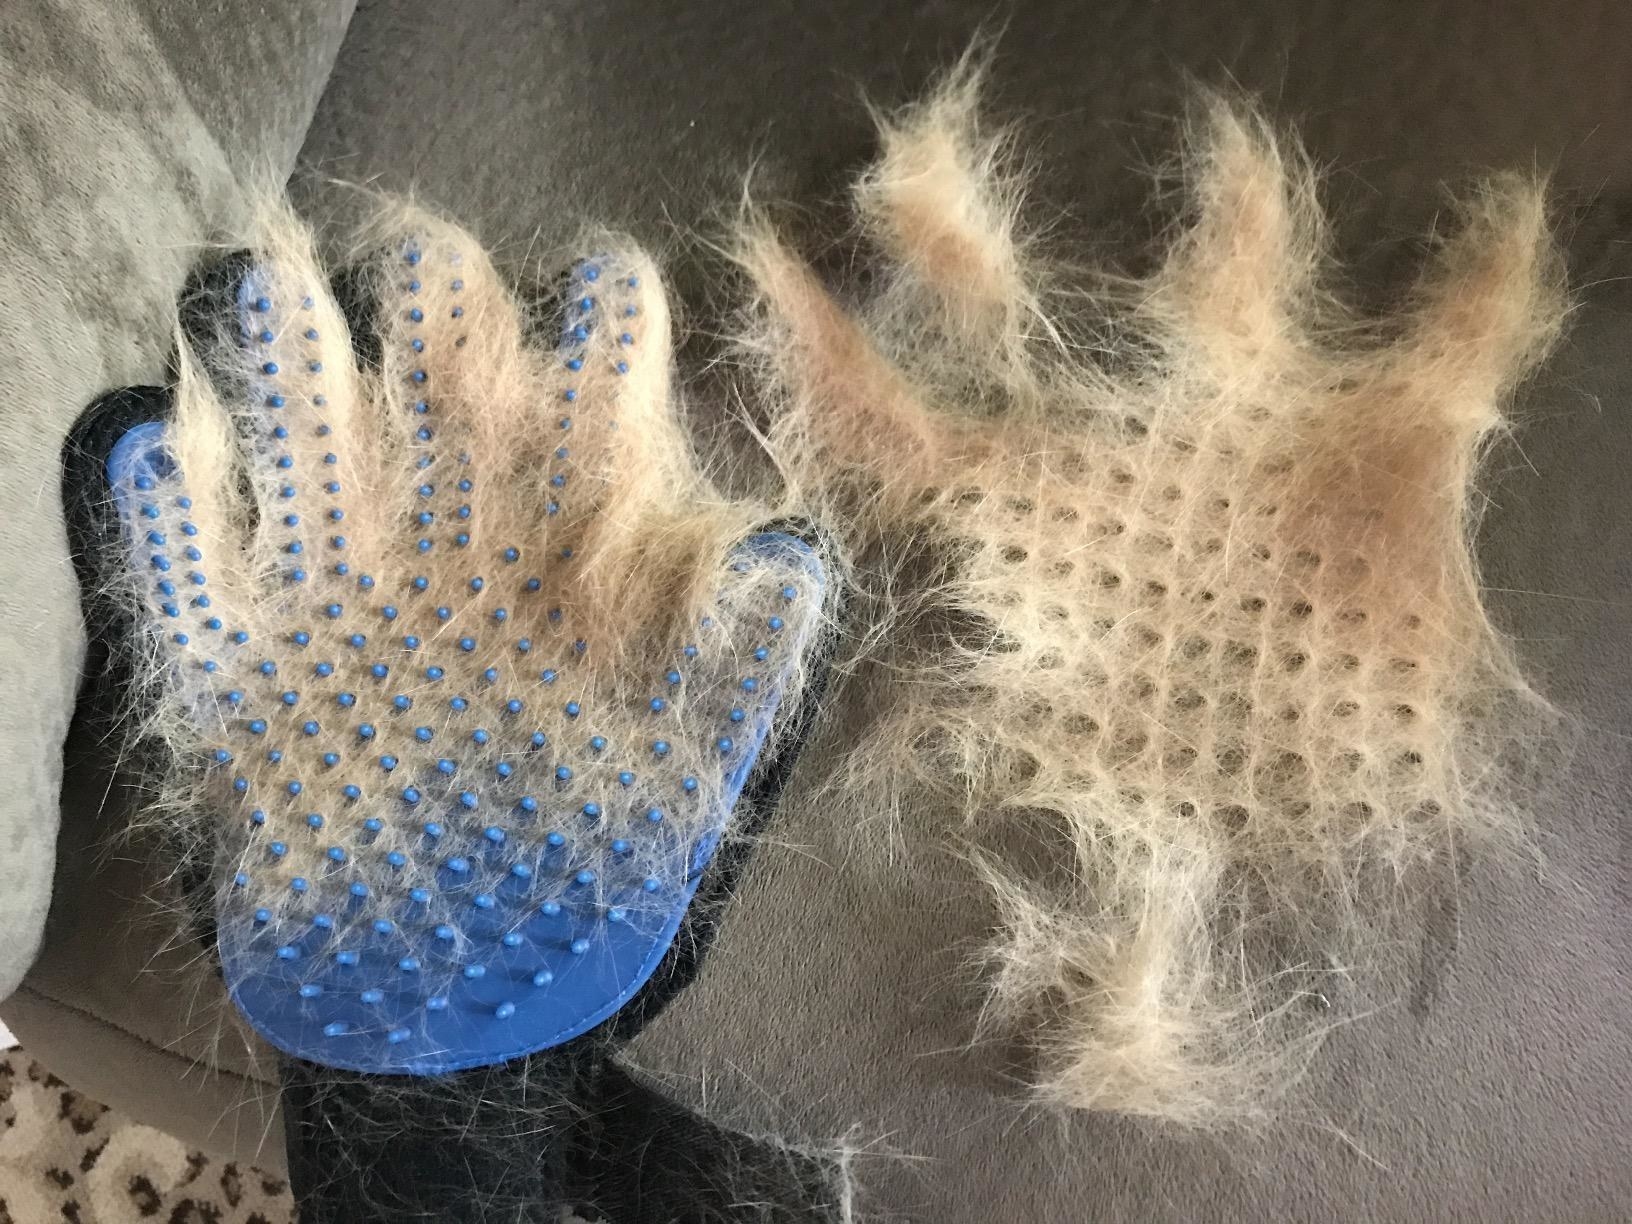 the gloves with a bunch of pet hair on them showing how much fur comes off